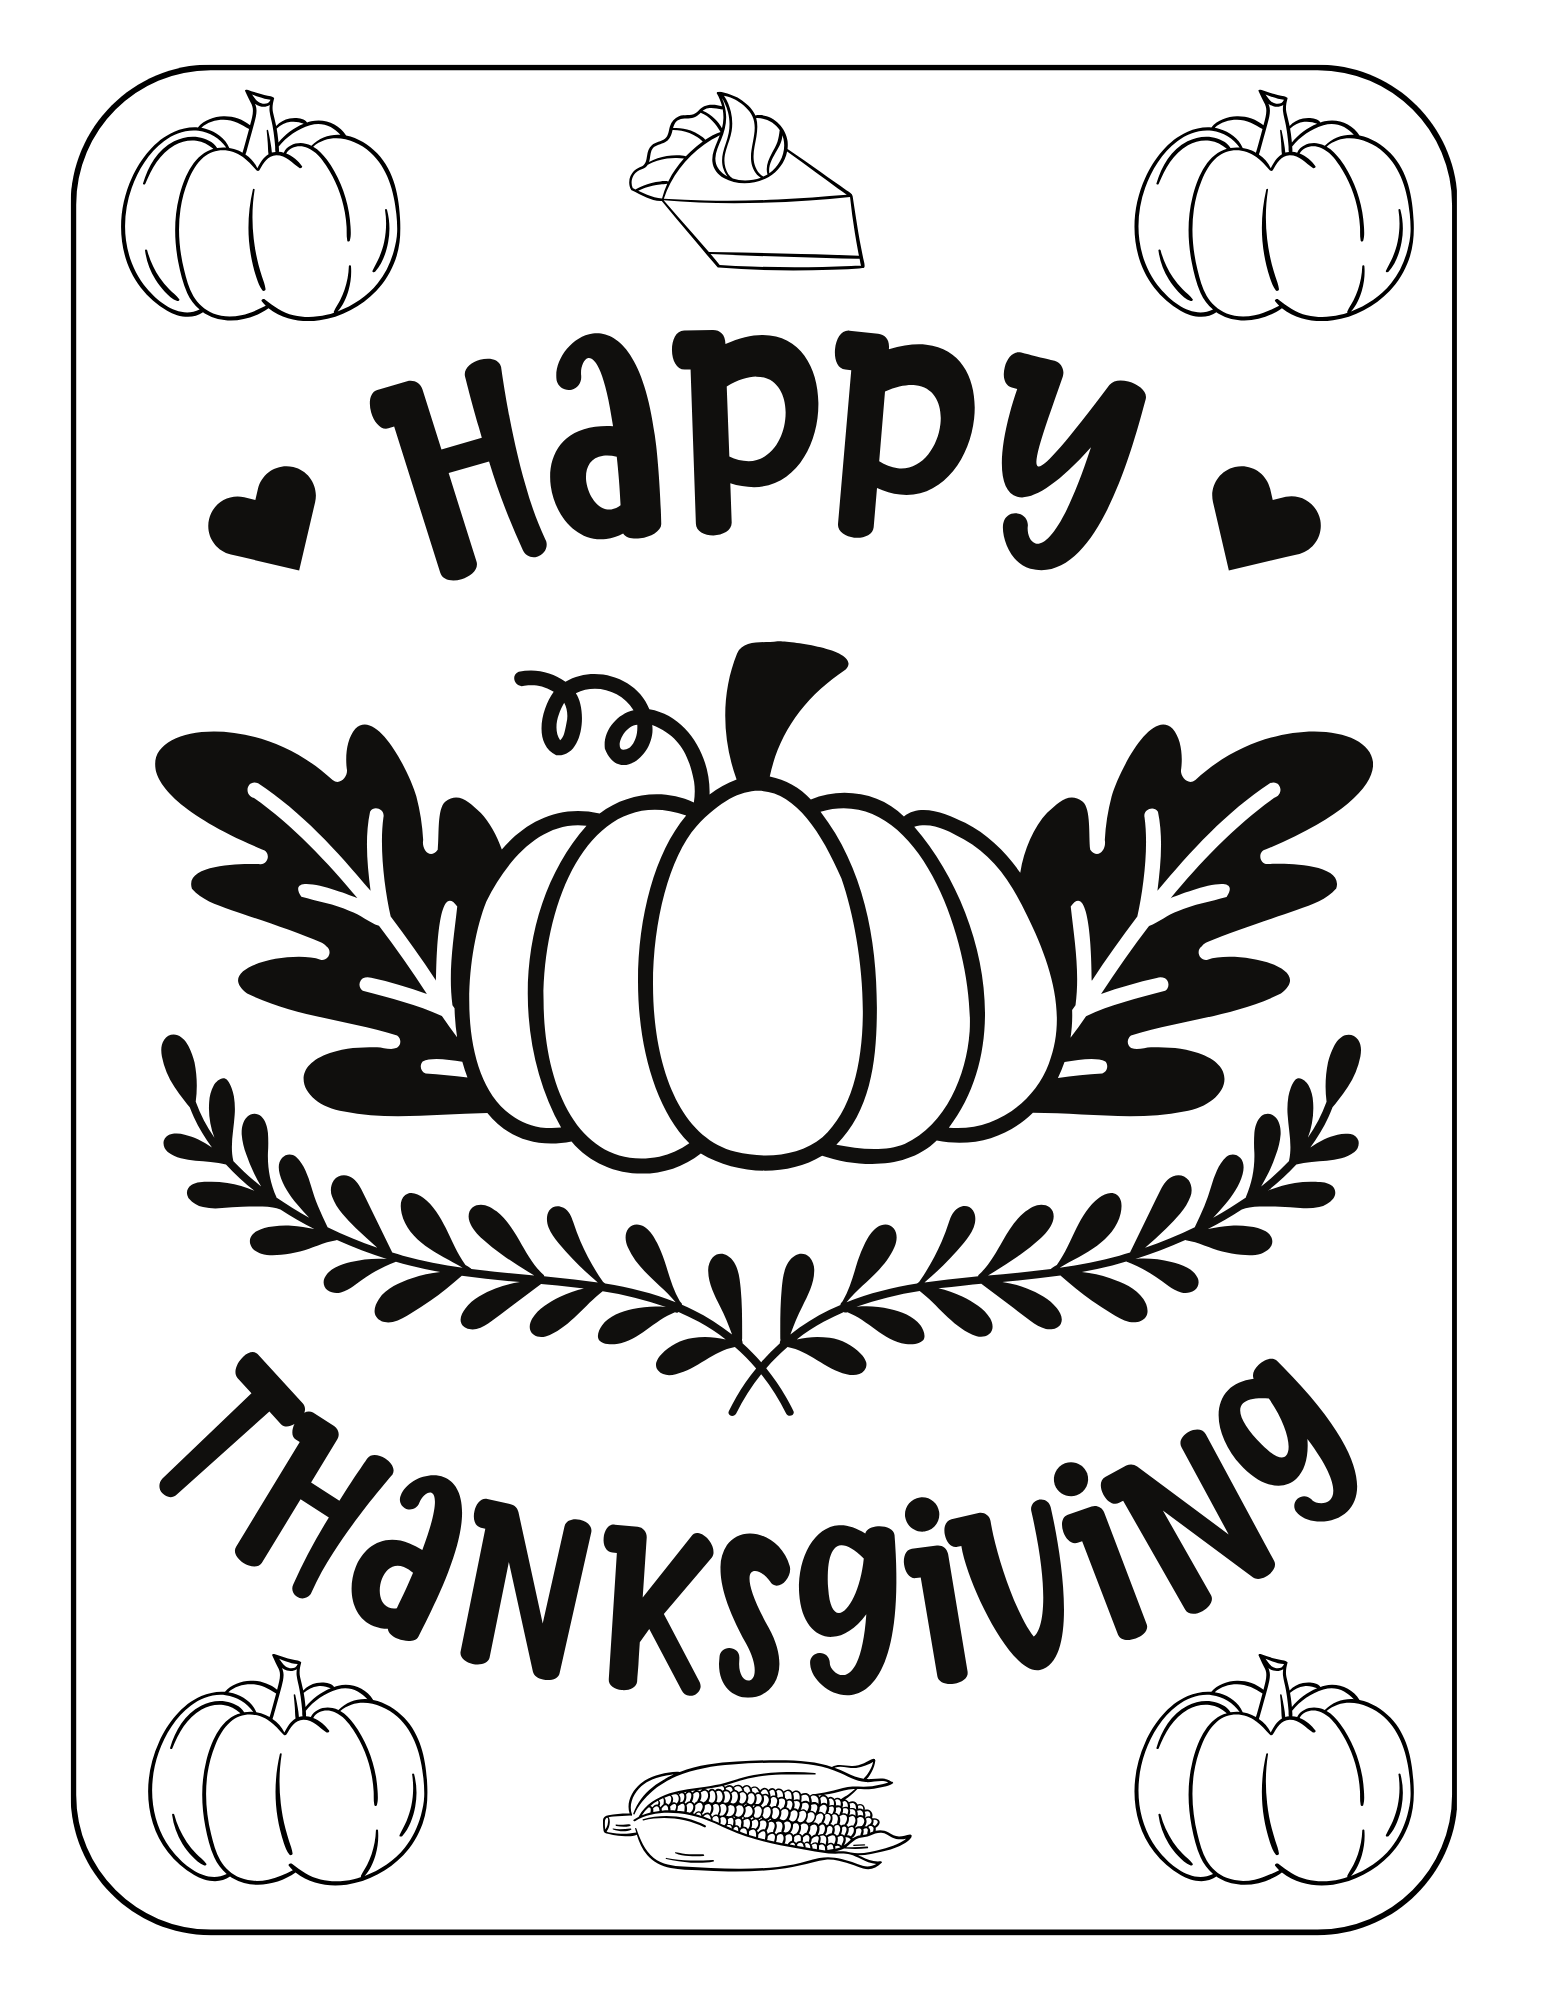 Cute thanksgiving coloring pages for kids and adults